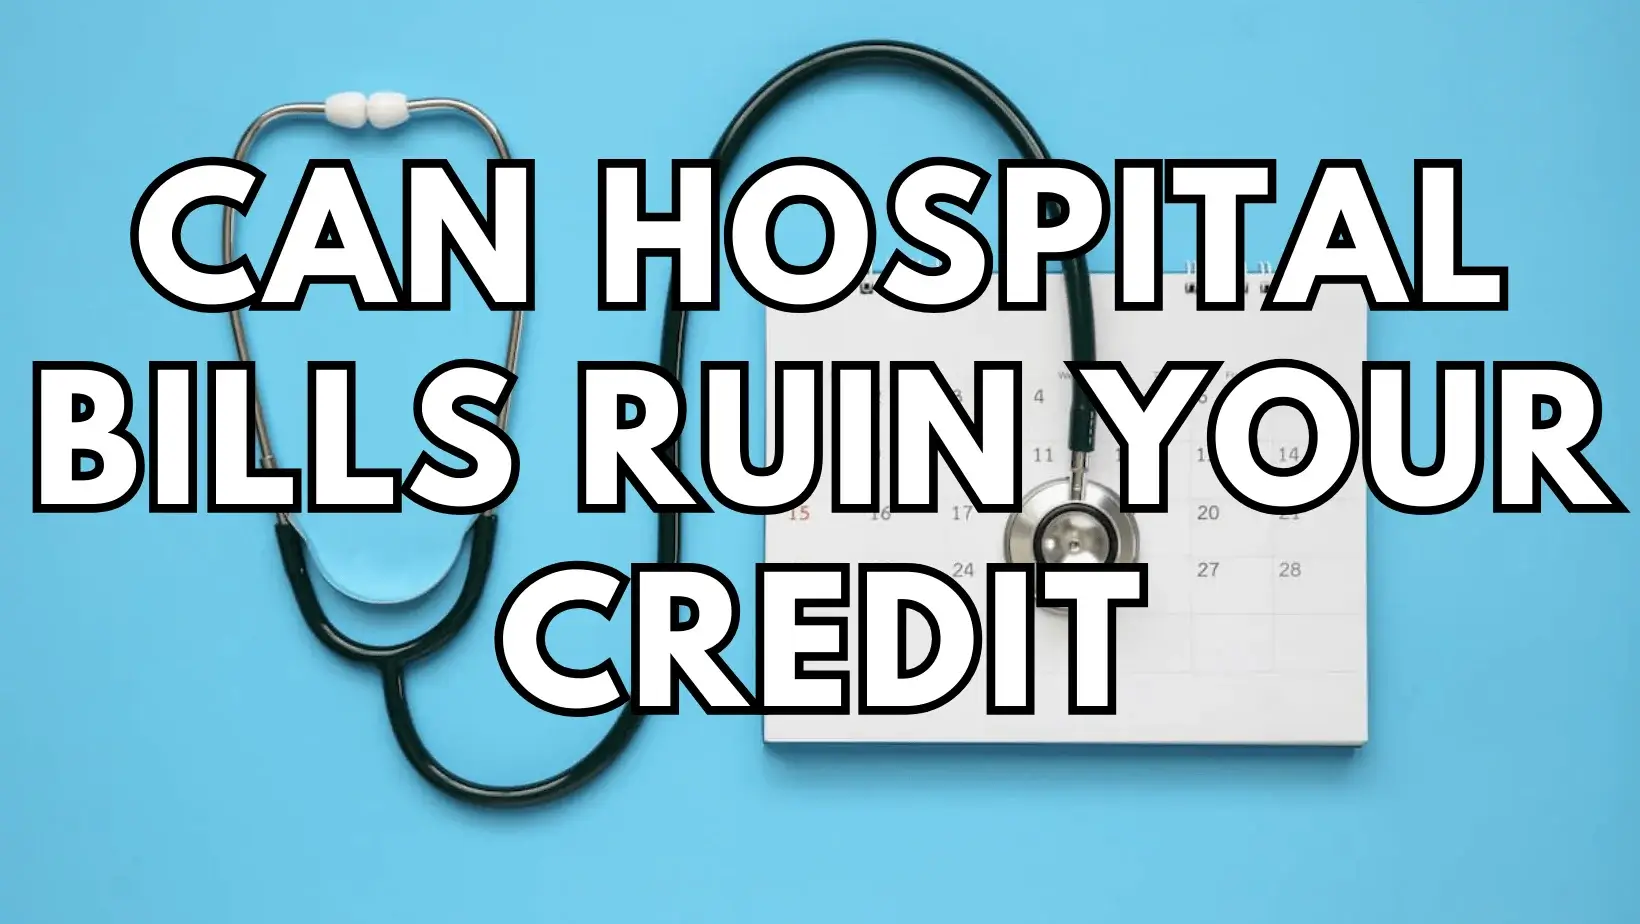 Can Hospital Bills Ruin Your Credit featured image